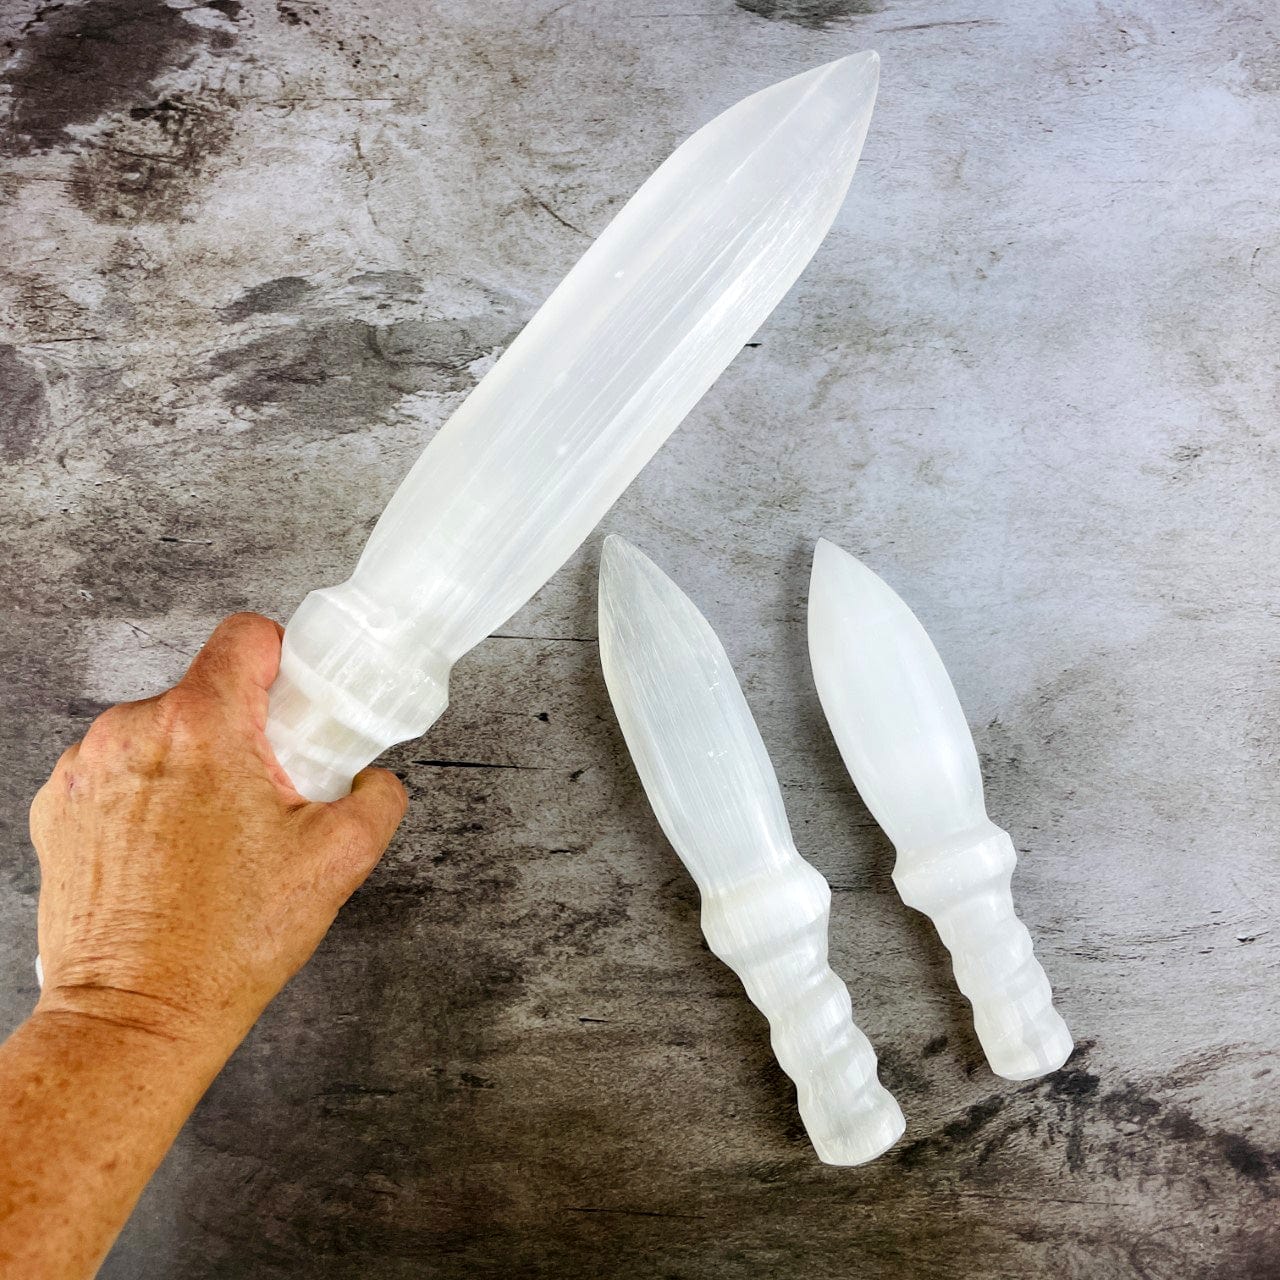 3 sizes of Selenite Knife with Twisted Handles, with the large one in a hand for size reference